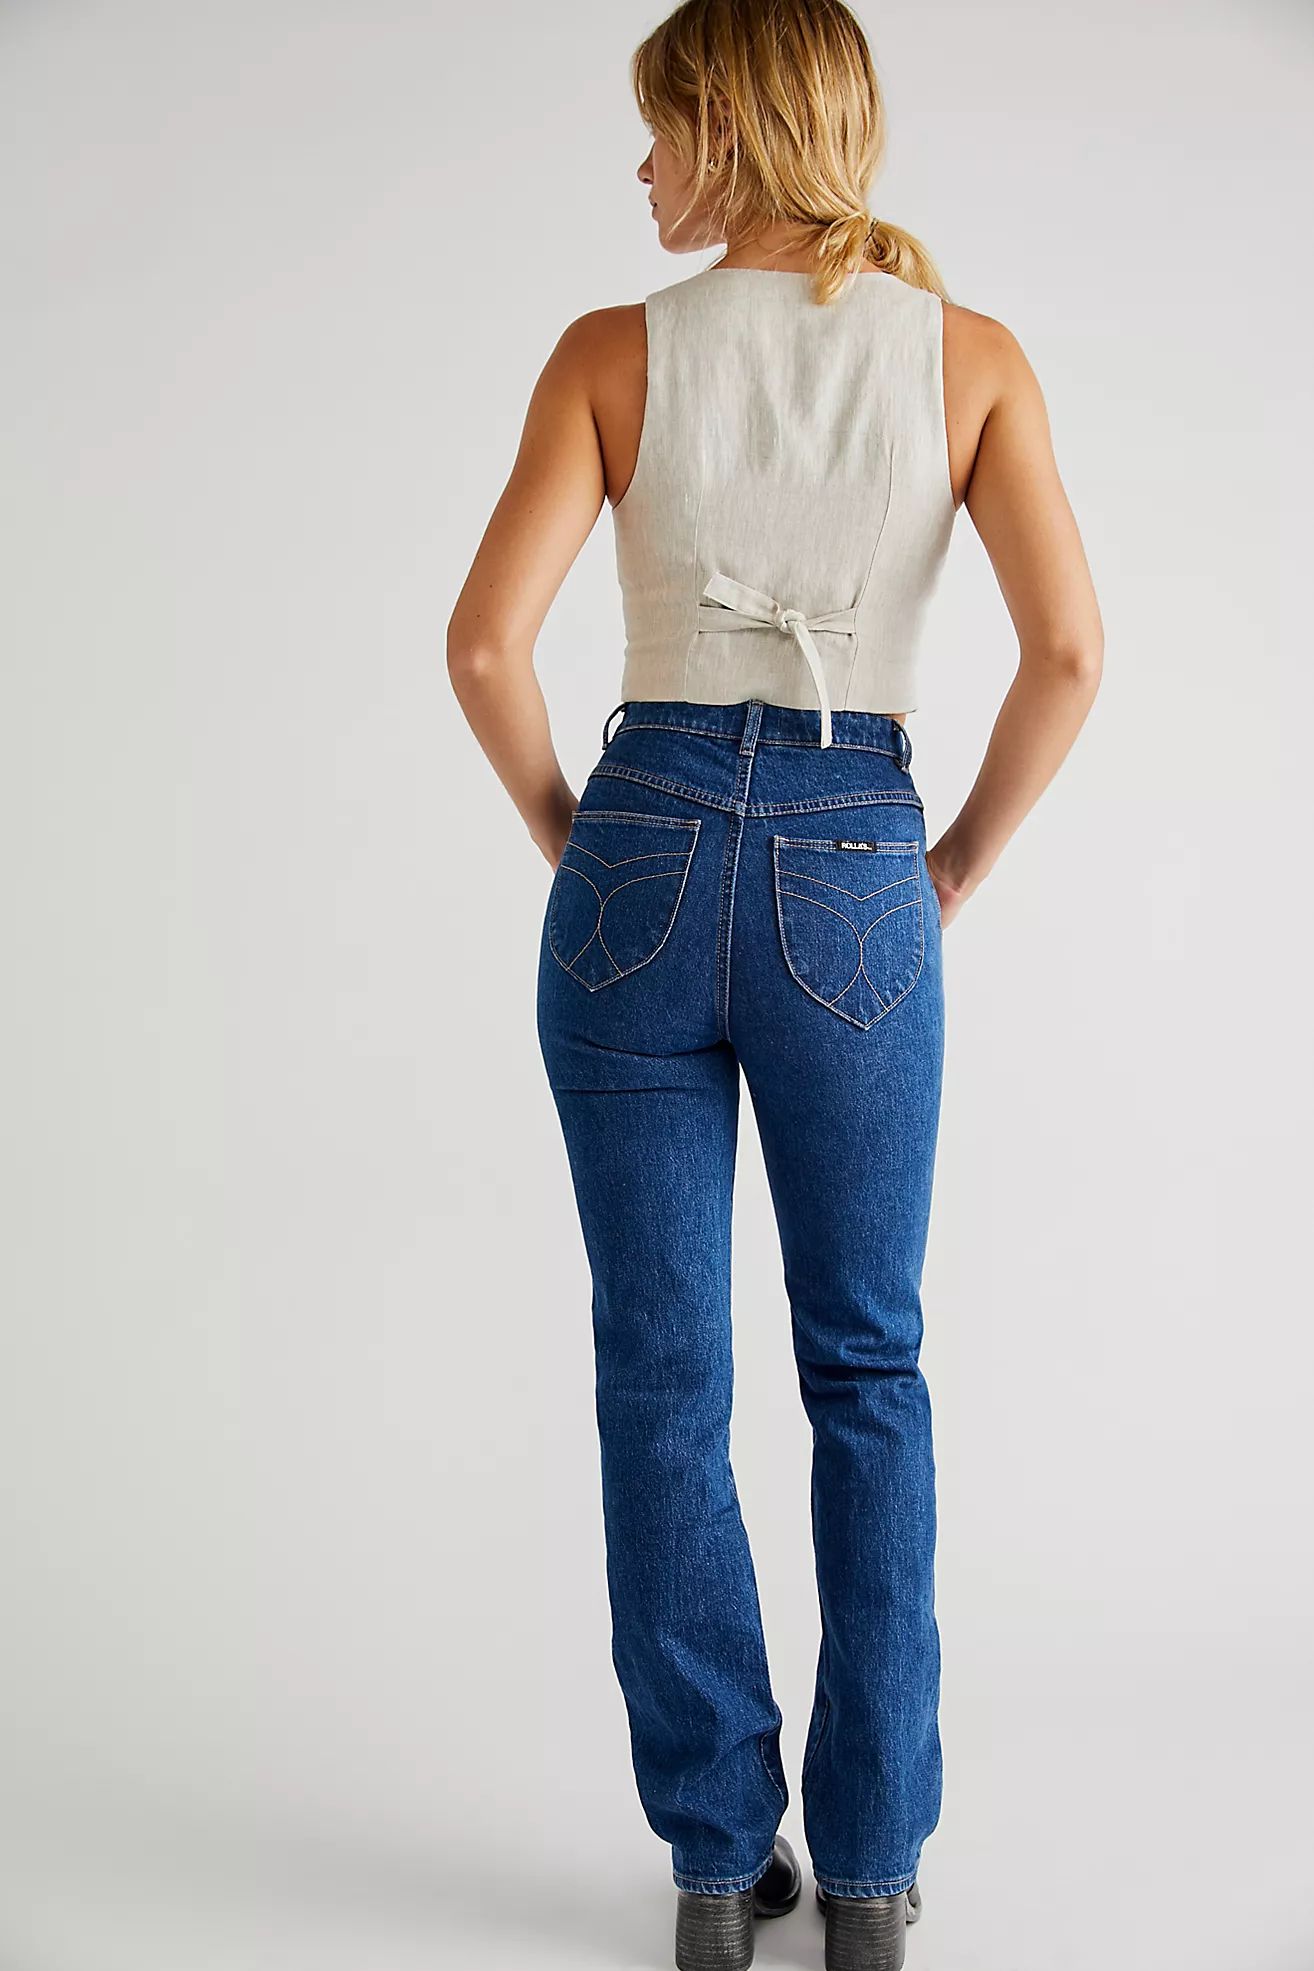 Rolla's Original Straight Jeans | Free People (Global - UK&FR Excluded)